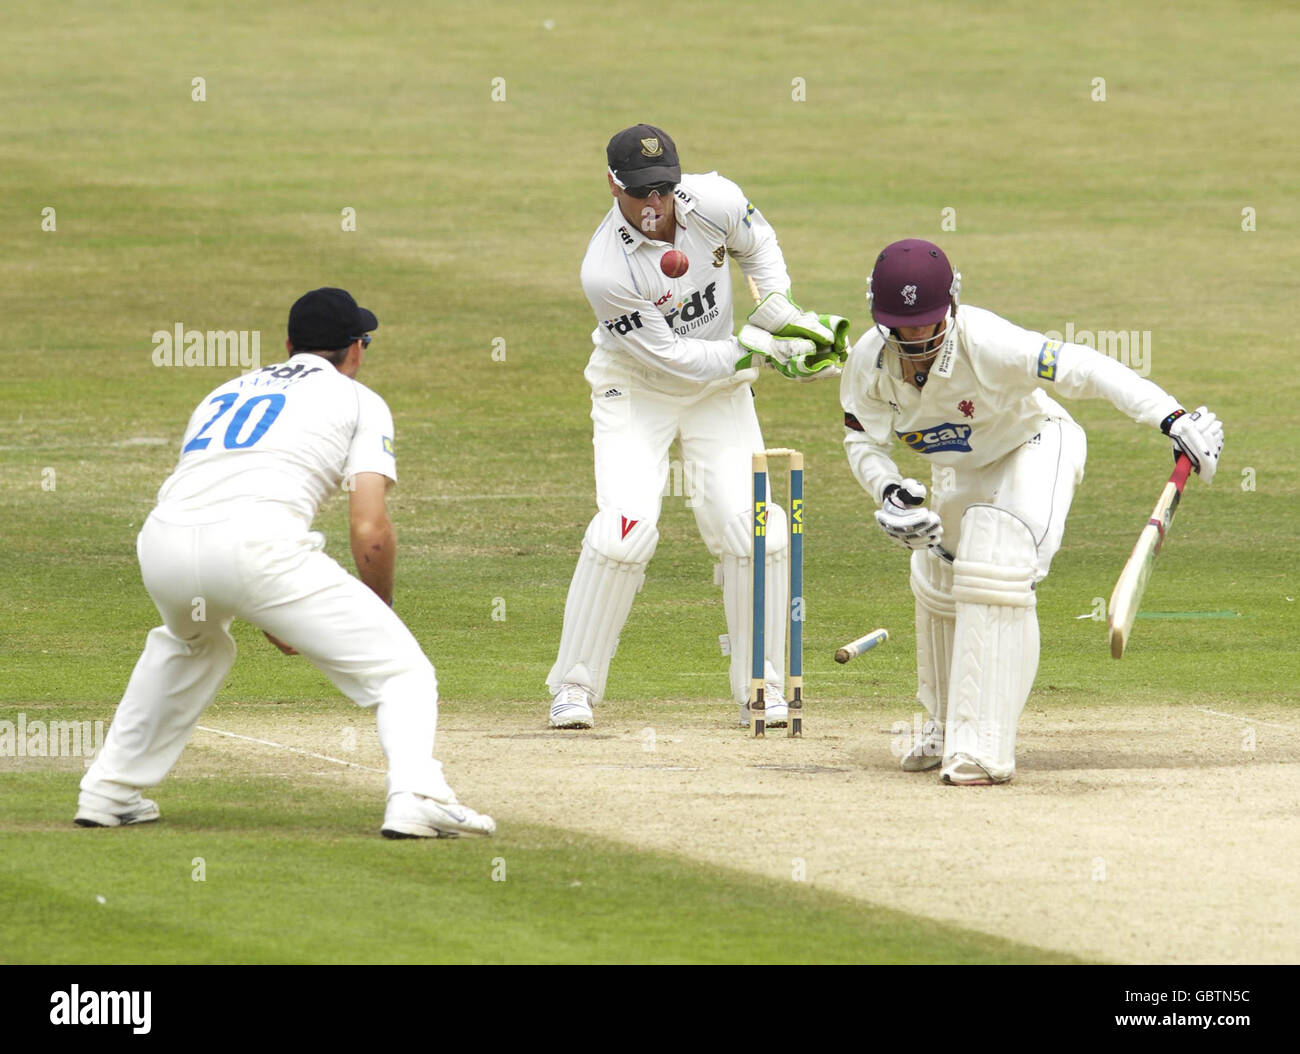 Somerset's Max Waller is clean bowled by Sussex's Piyush Chawla during the Liverpool Victoria County Championship match at the County Ground, Hove. Stock Photo